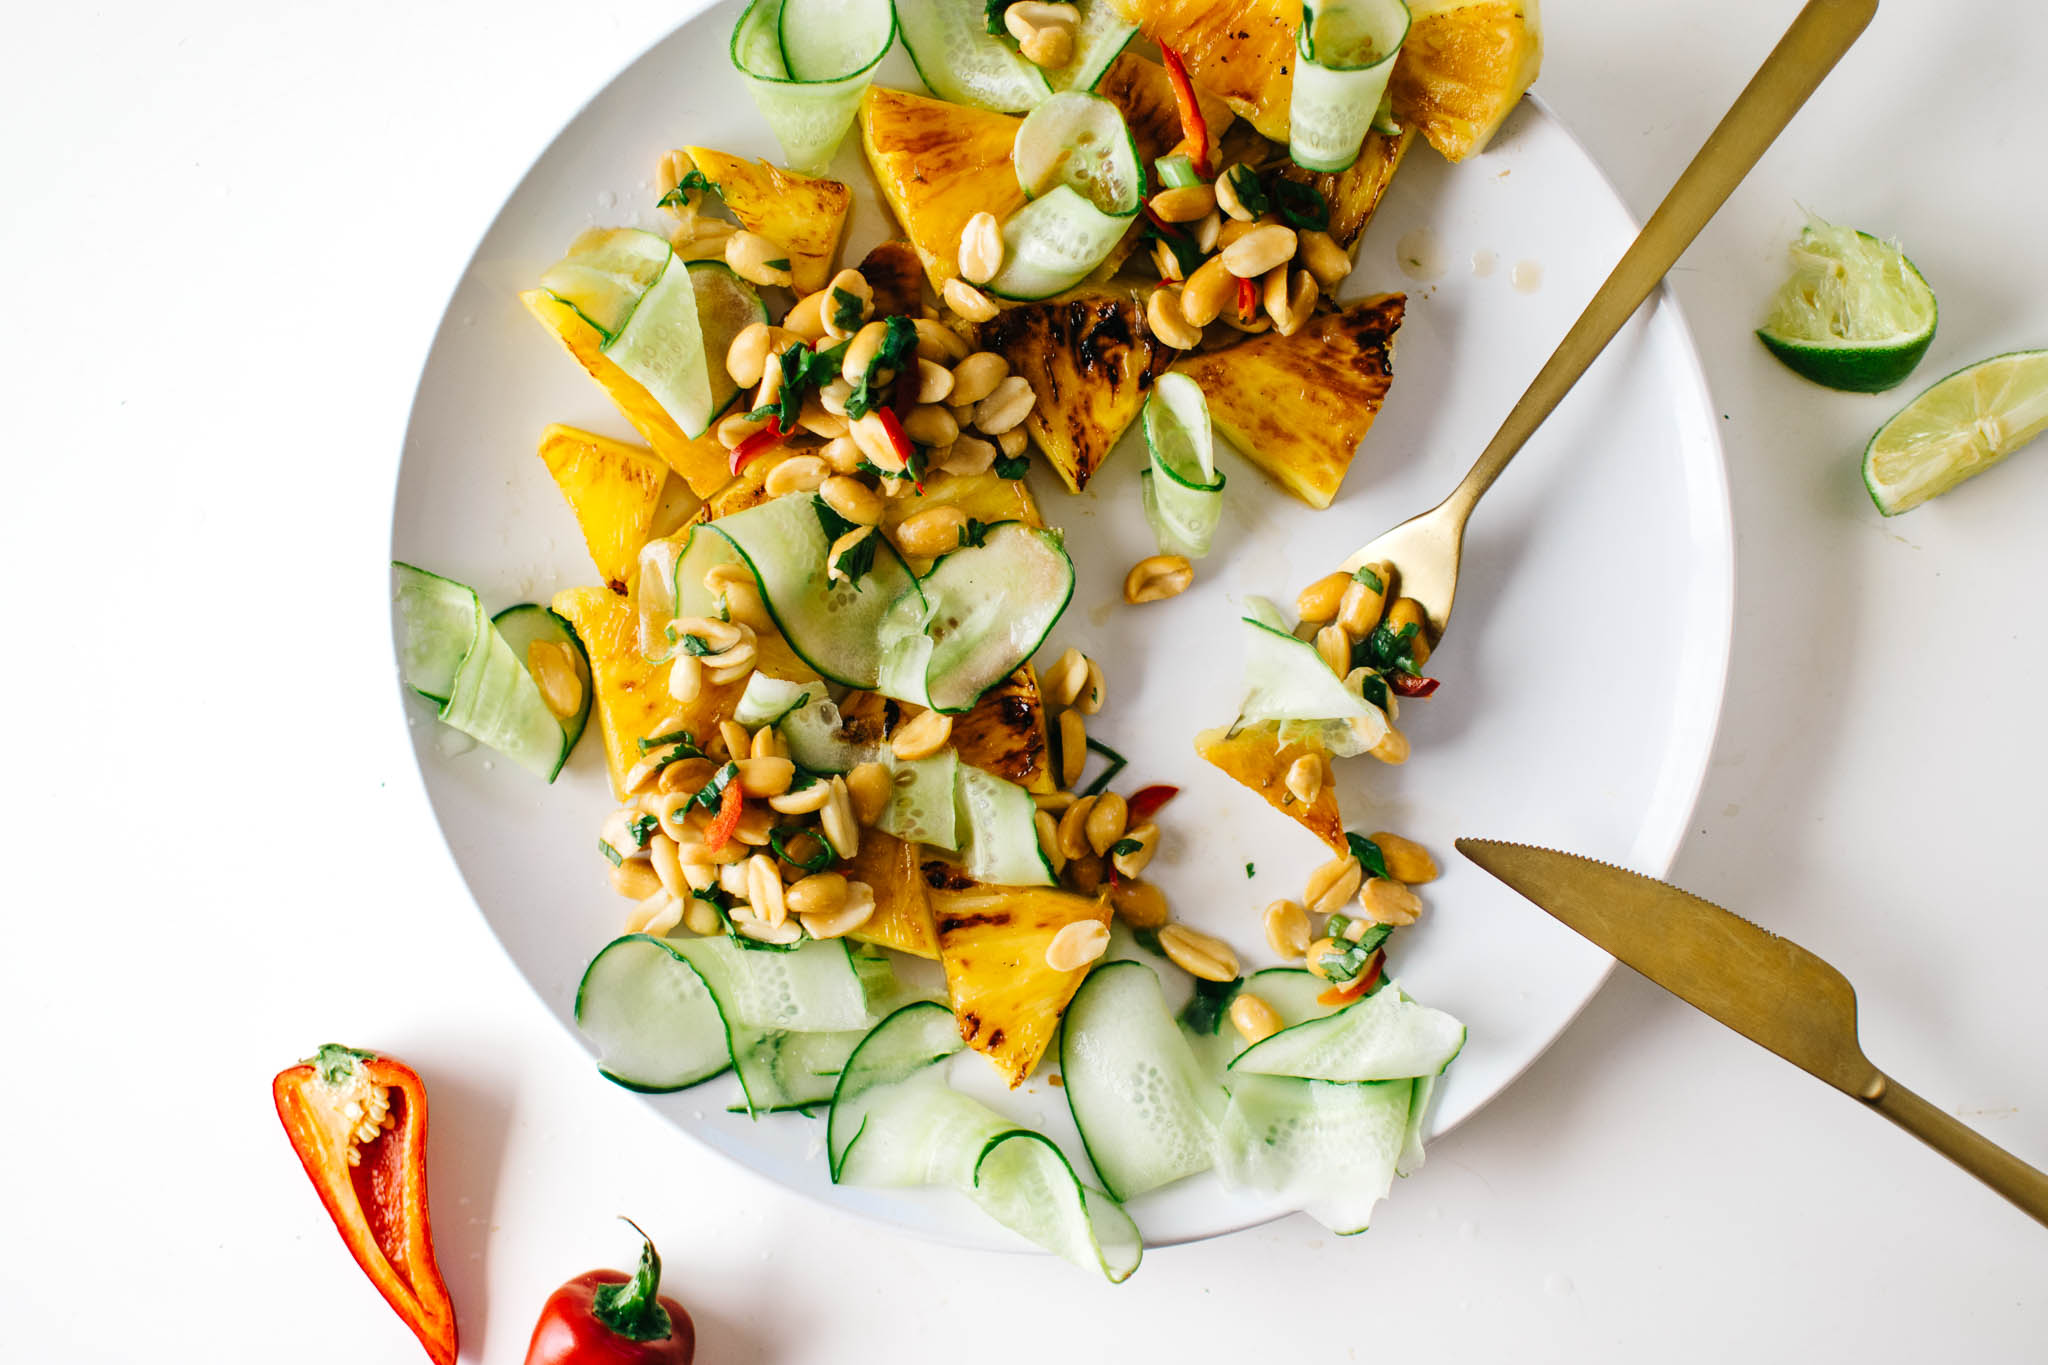 GRILLED PINEAPPLE & CUCUMBER SALAD WITH SPICY PEANUTS.